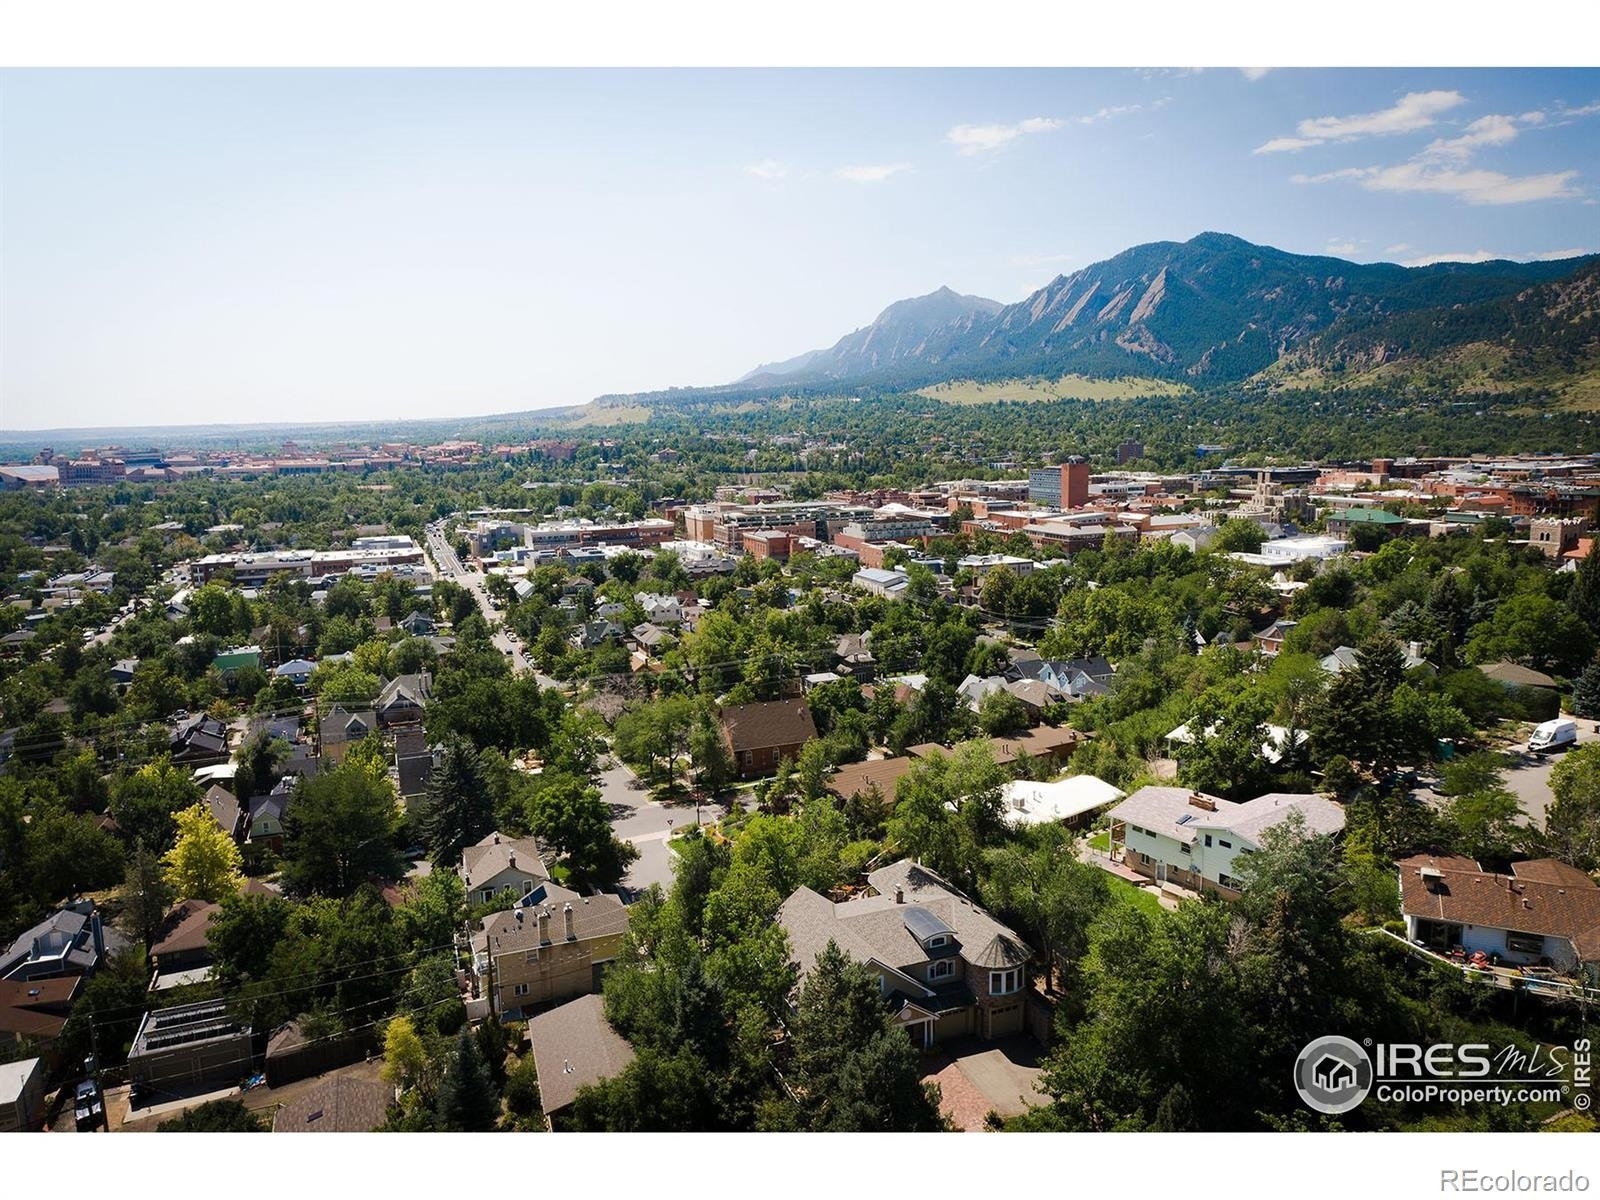 Property at Whittier, Boulder, CO 80304